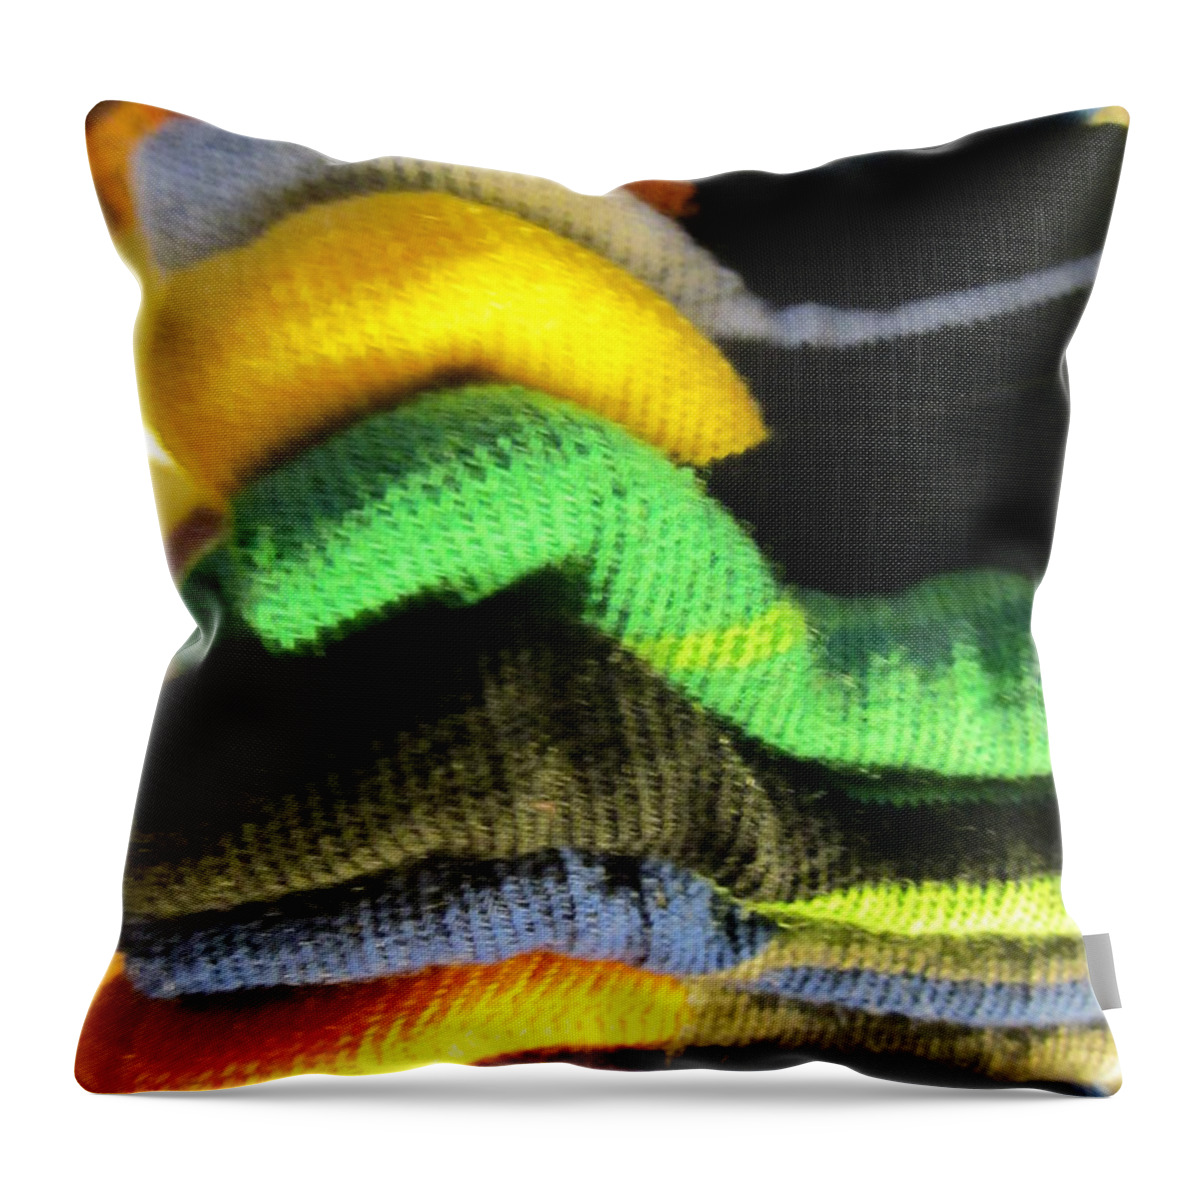 Socks Throw Pillow featuring the photograph Piled up by Rosita Larsson